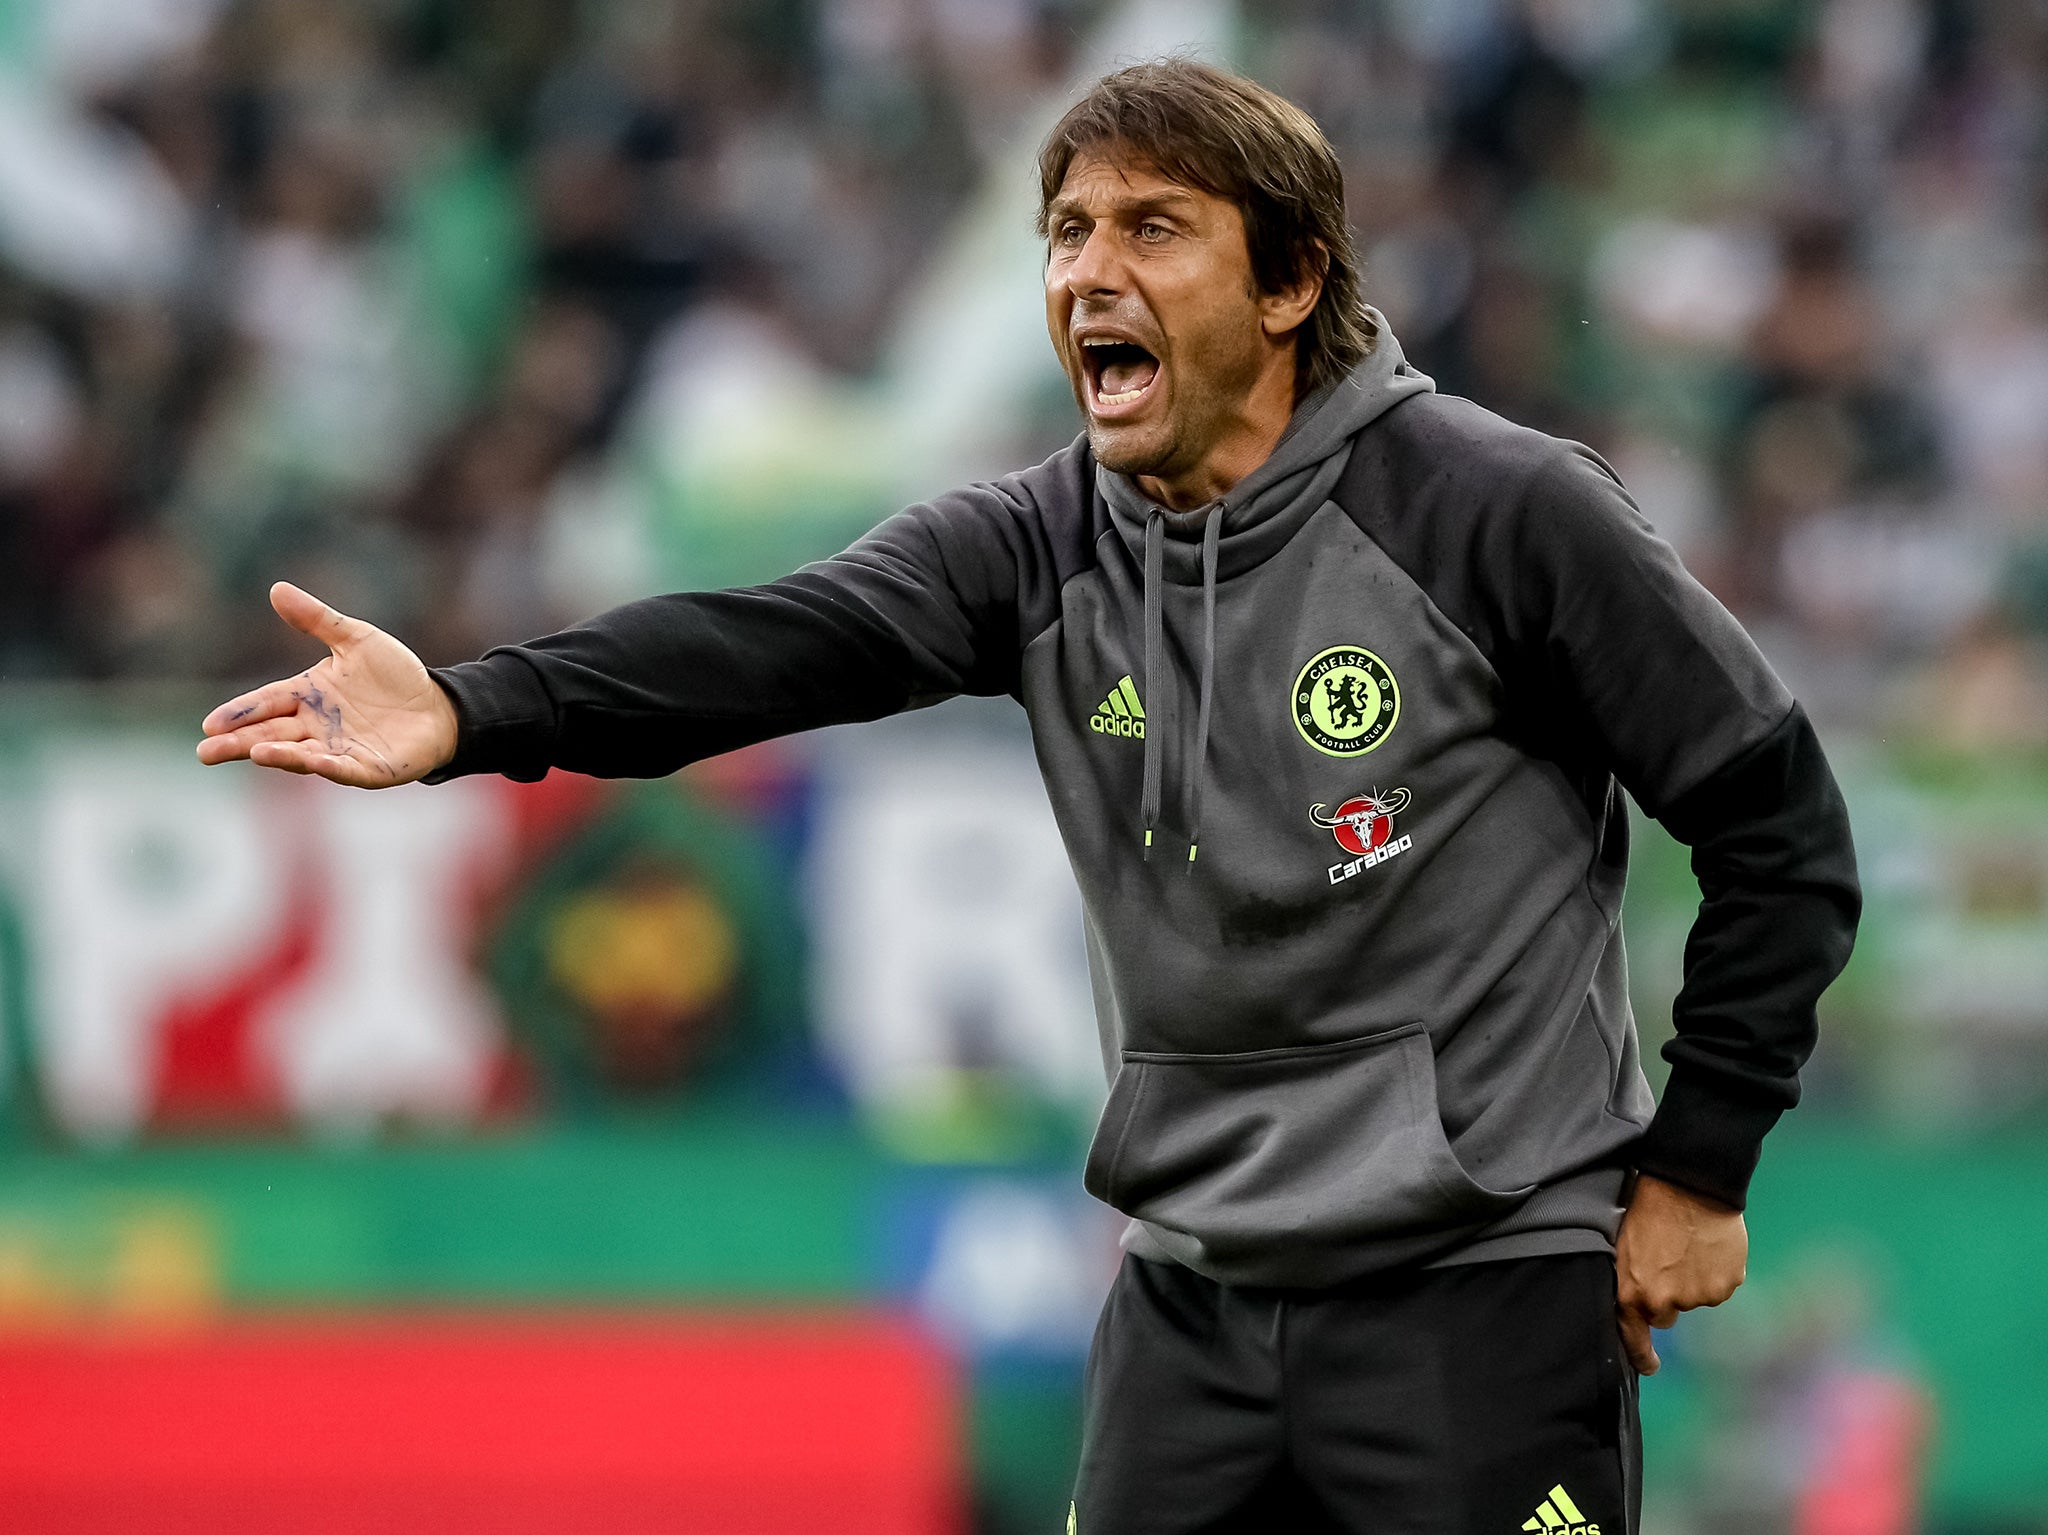 Antonio Conte manages from the sideline